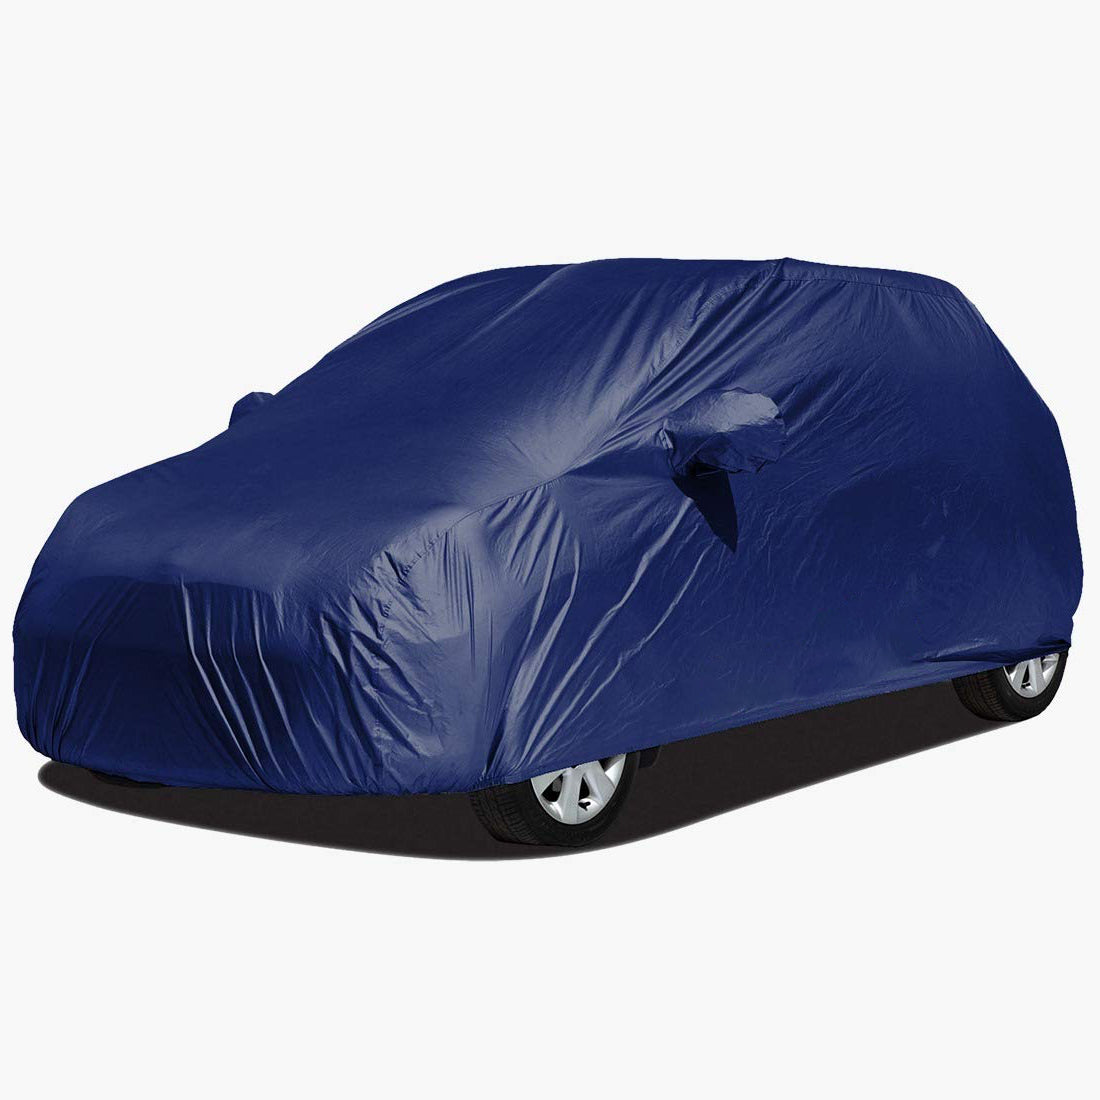 Hyundai i20 Active Car Body Cover, Heat & Water Resistant, Dustproof without side mirror pockets